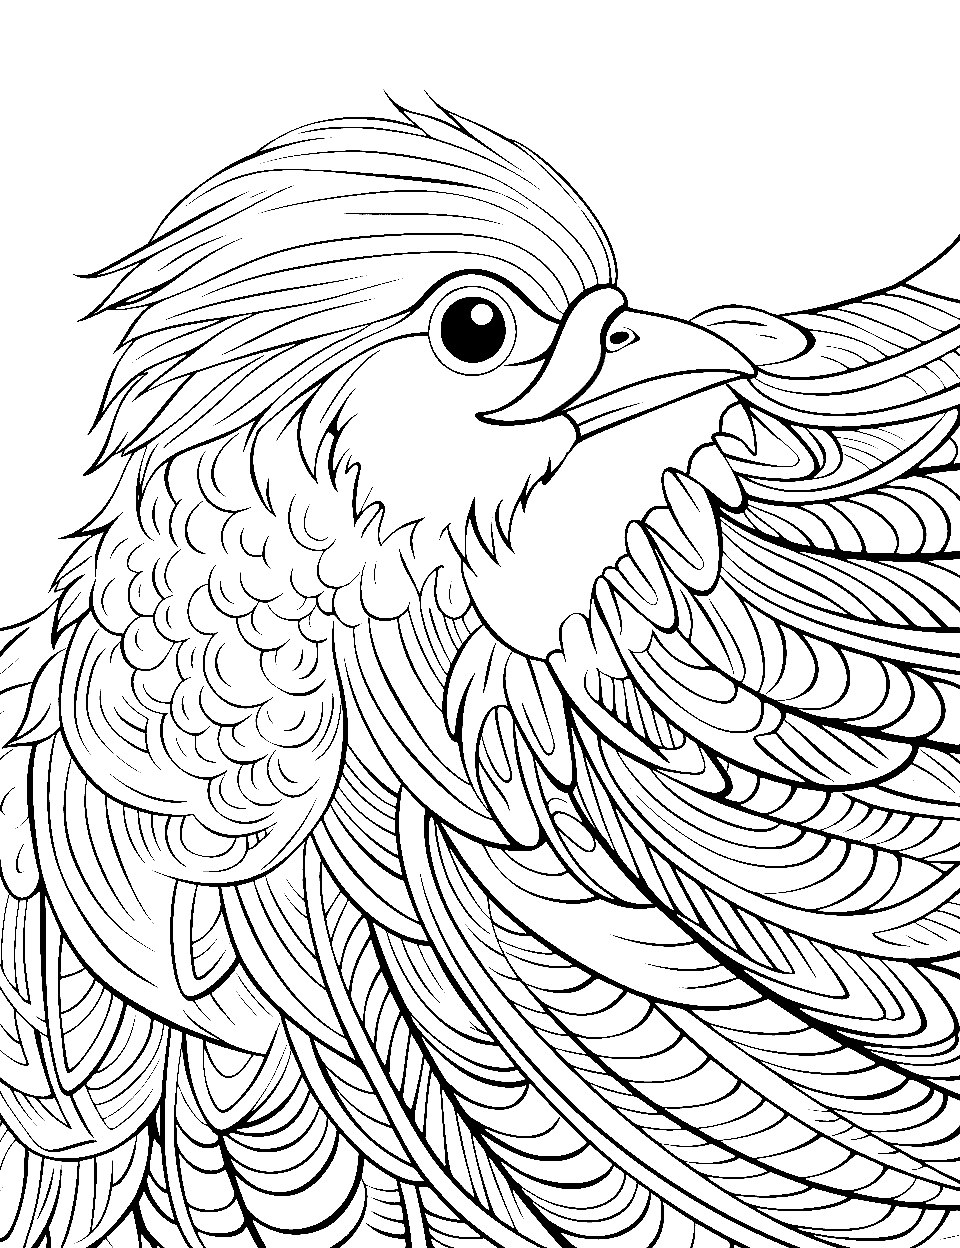 Blue Jay's Feathered Beauty Coloring Page - Close-up of the intricate feather patterns of a blue jay.